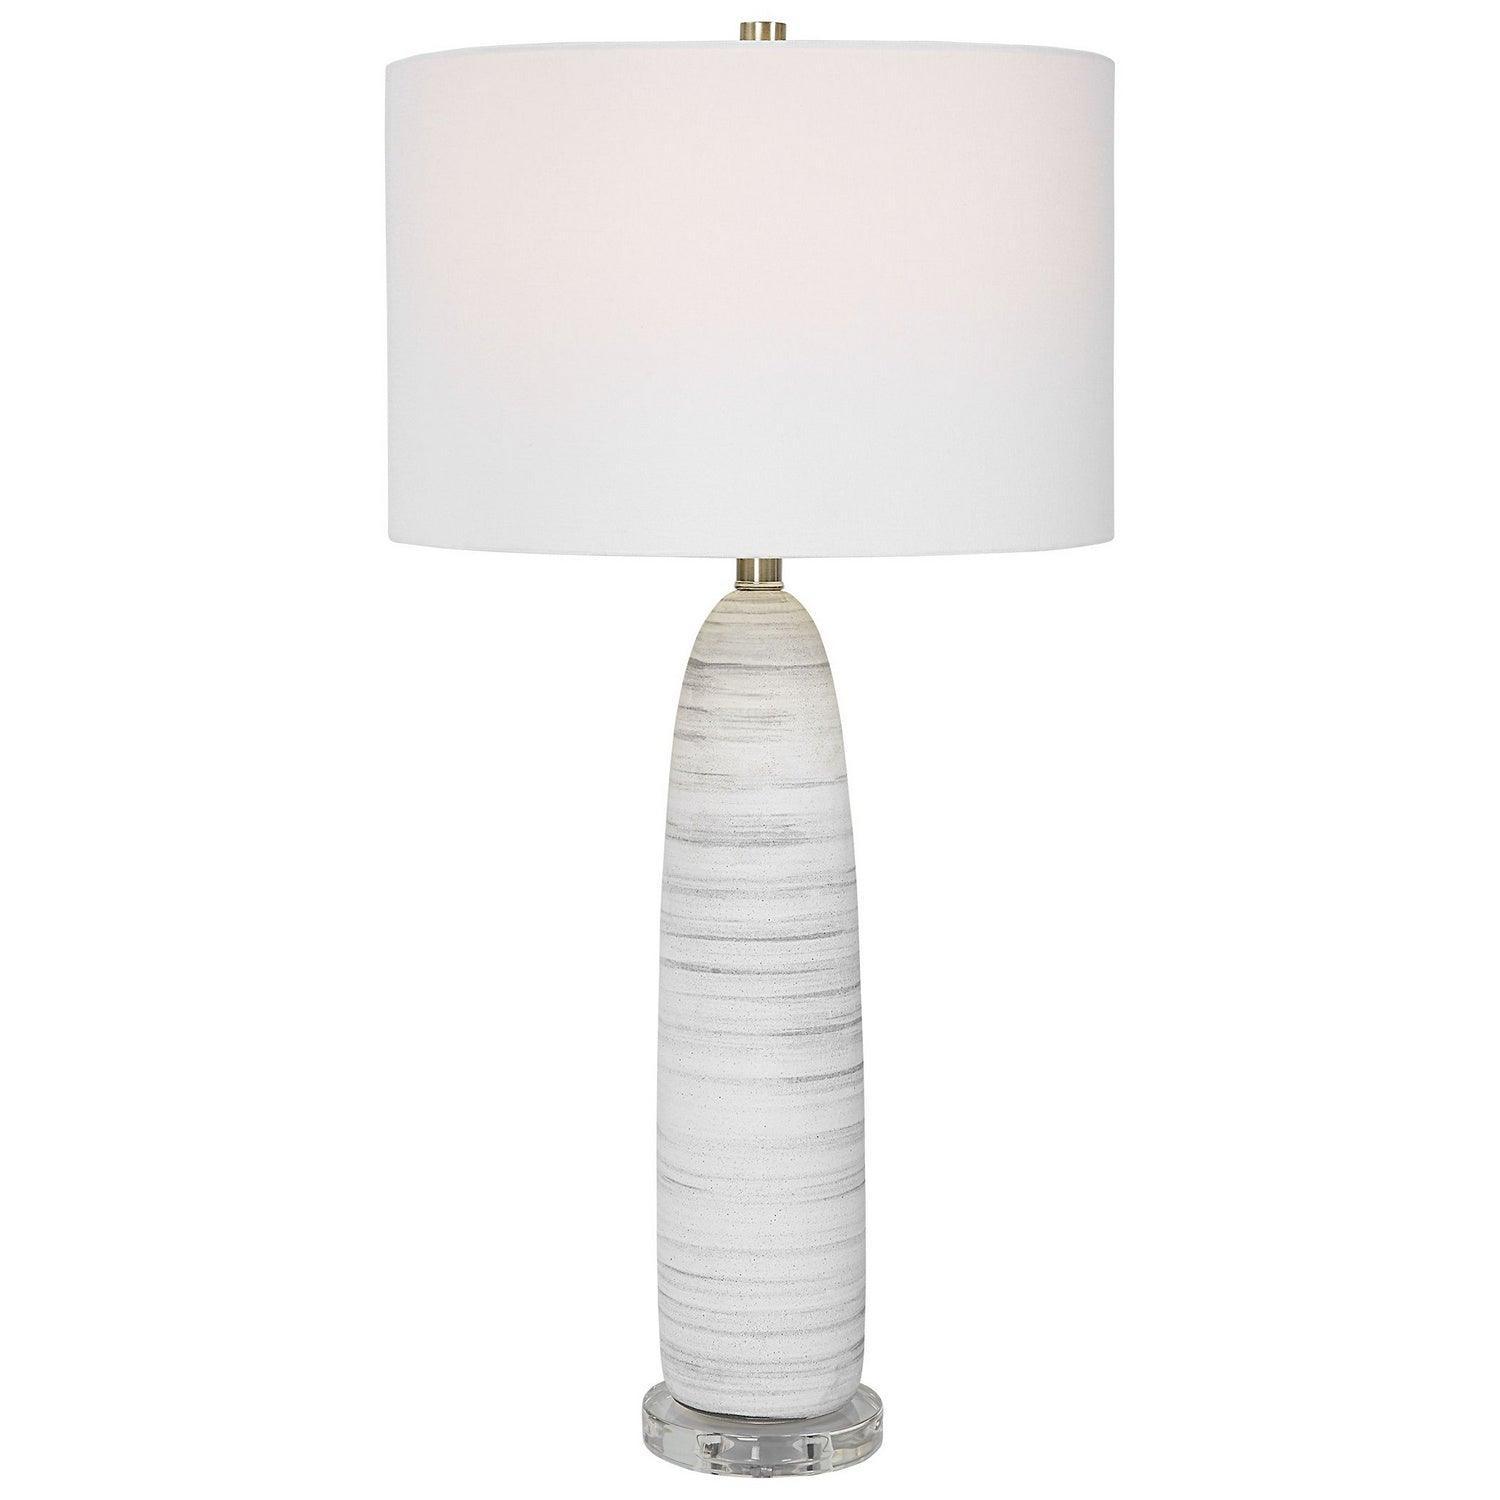 The Uttermost - Levadia Table Lamp - 30004-1 | Montreal Lighting & Hardware